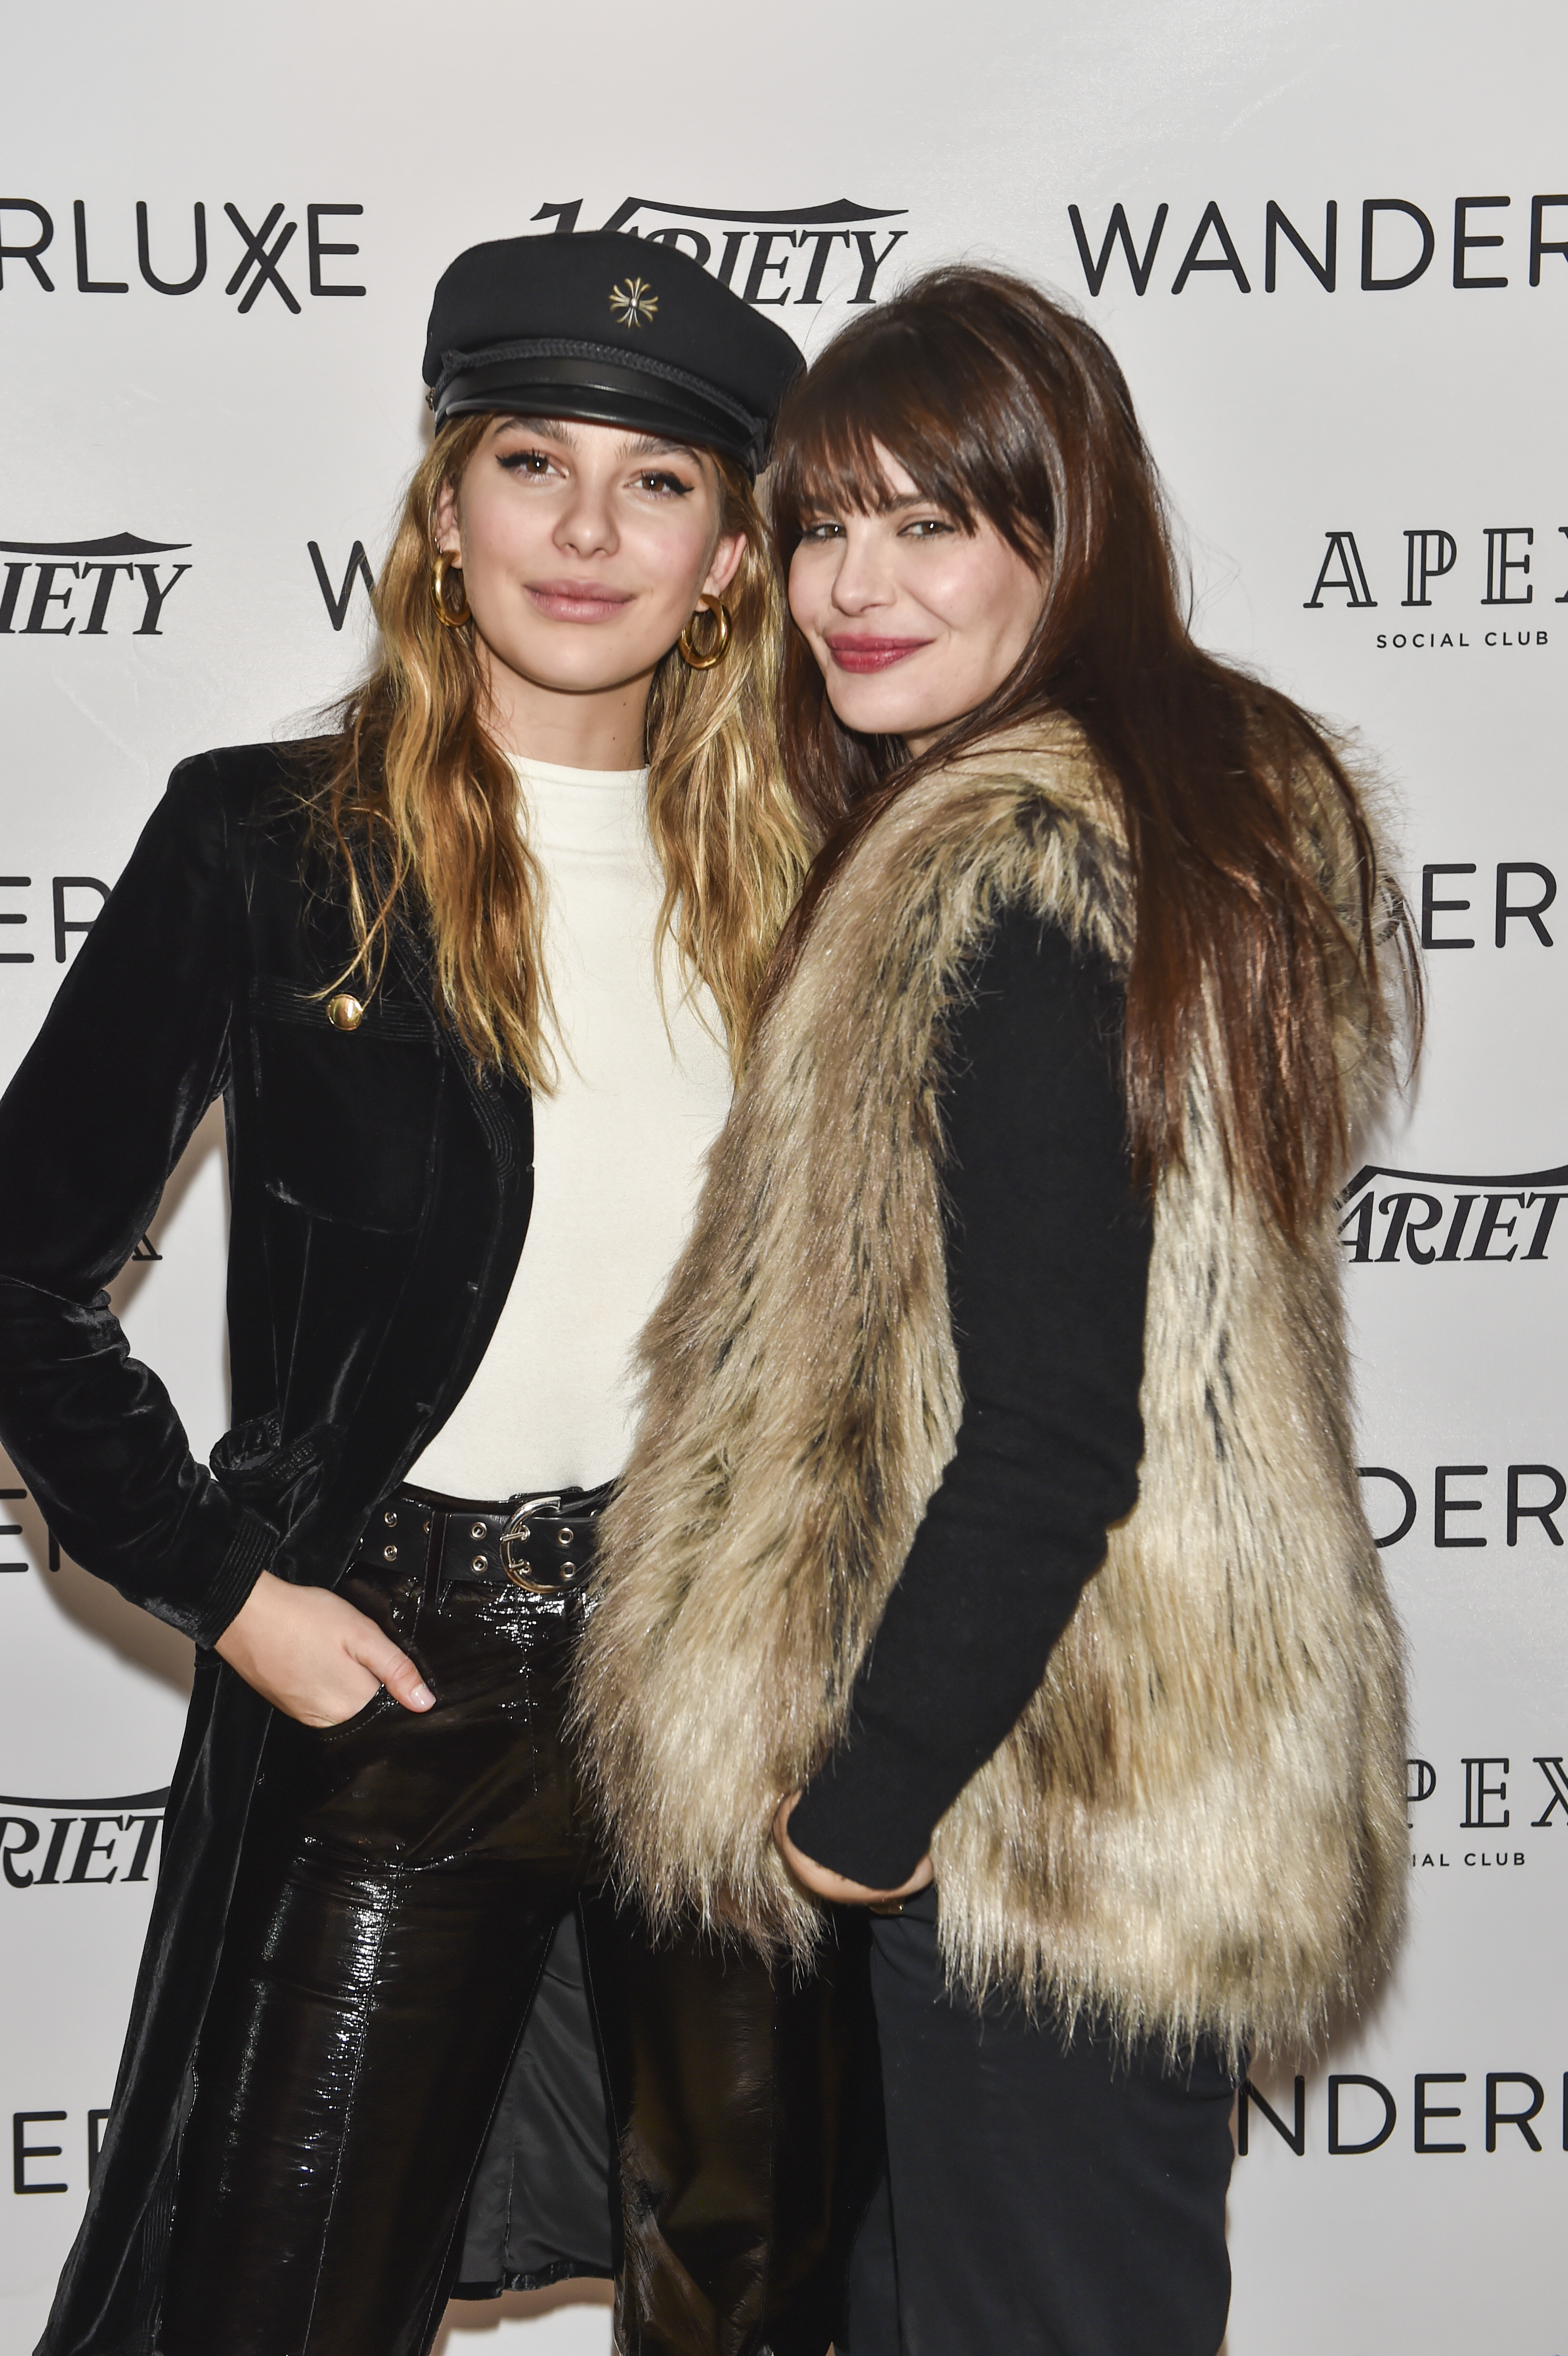 Camila Morrone and Lucila Solá attend WanderLuxxe House with Apex Social Club presents Augustine Frizzell's Never Goin' Back premiere party at the 2018 Sundance Film Festival on January 21, 2018, in Park City, Utah. | Source: Getty Images